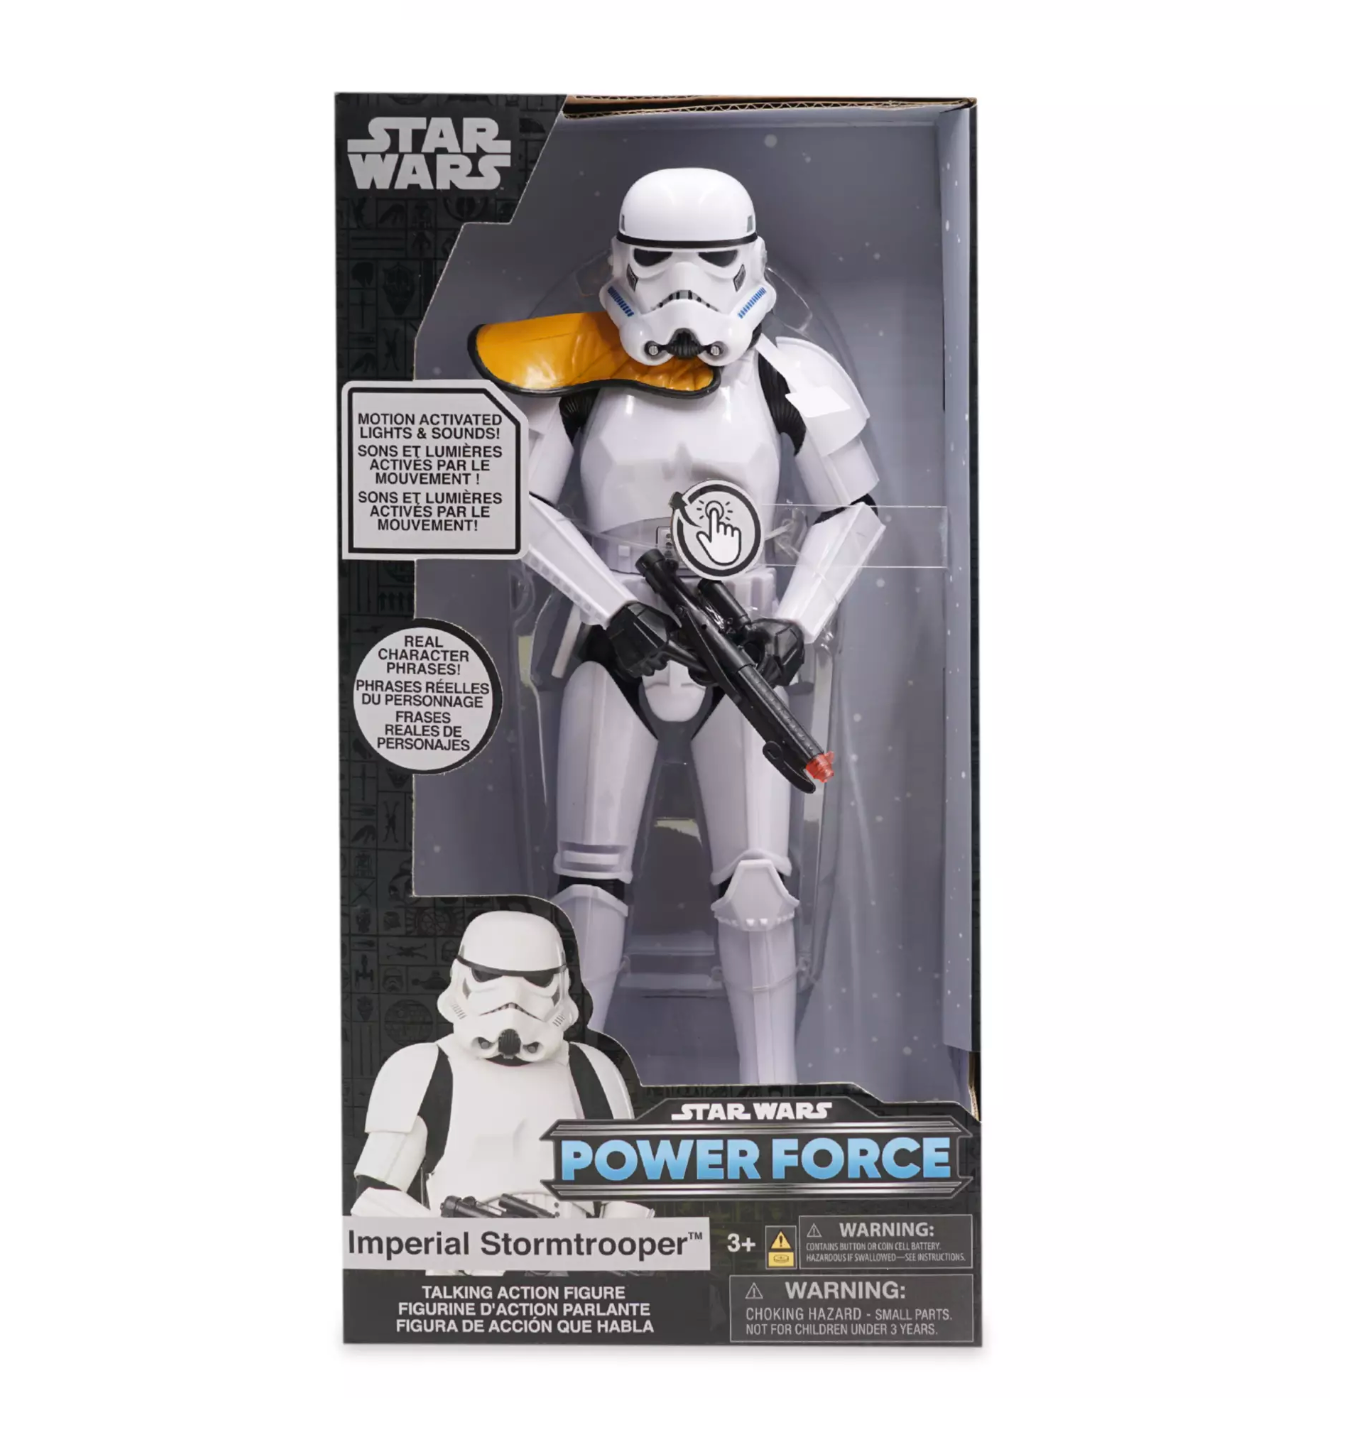 Disney Star Wars Imperial Stormtrooper Talking Action Figure Power Force New Box